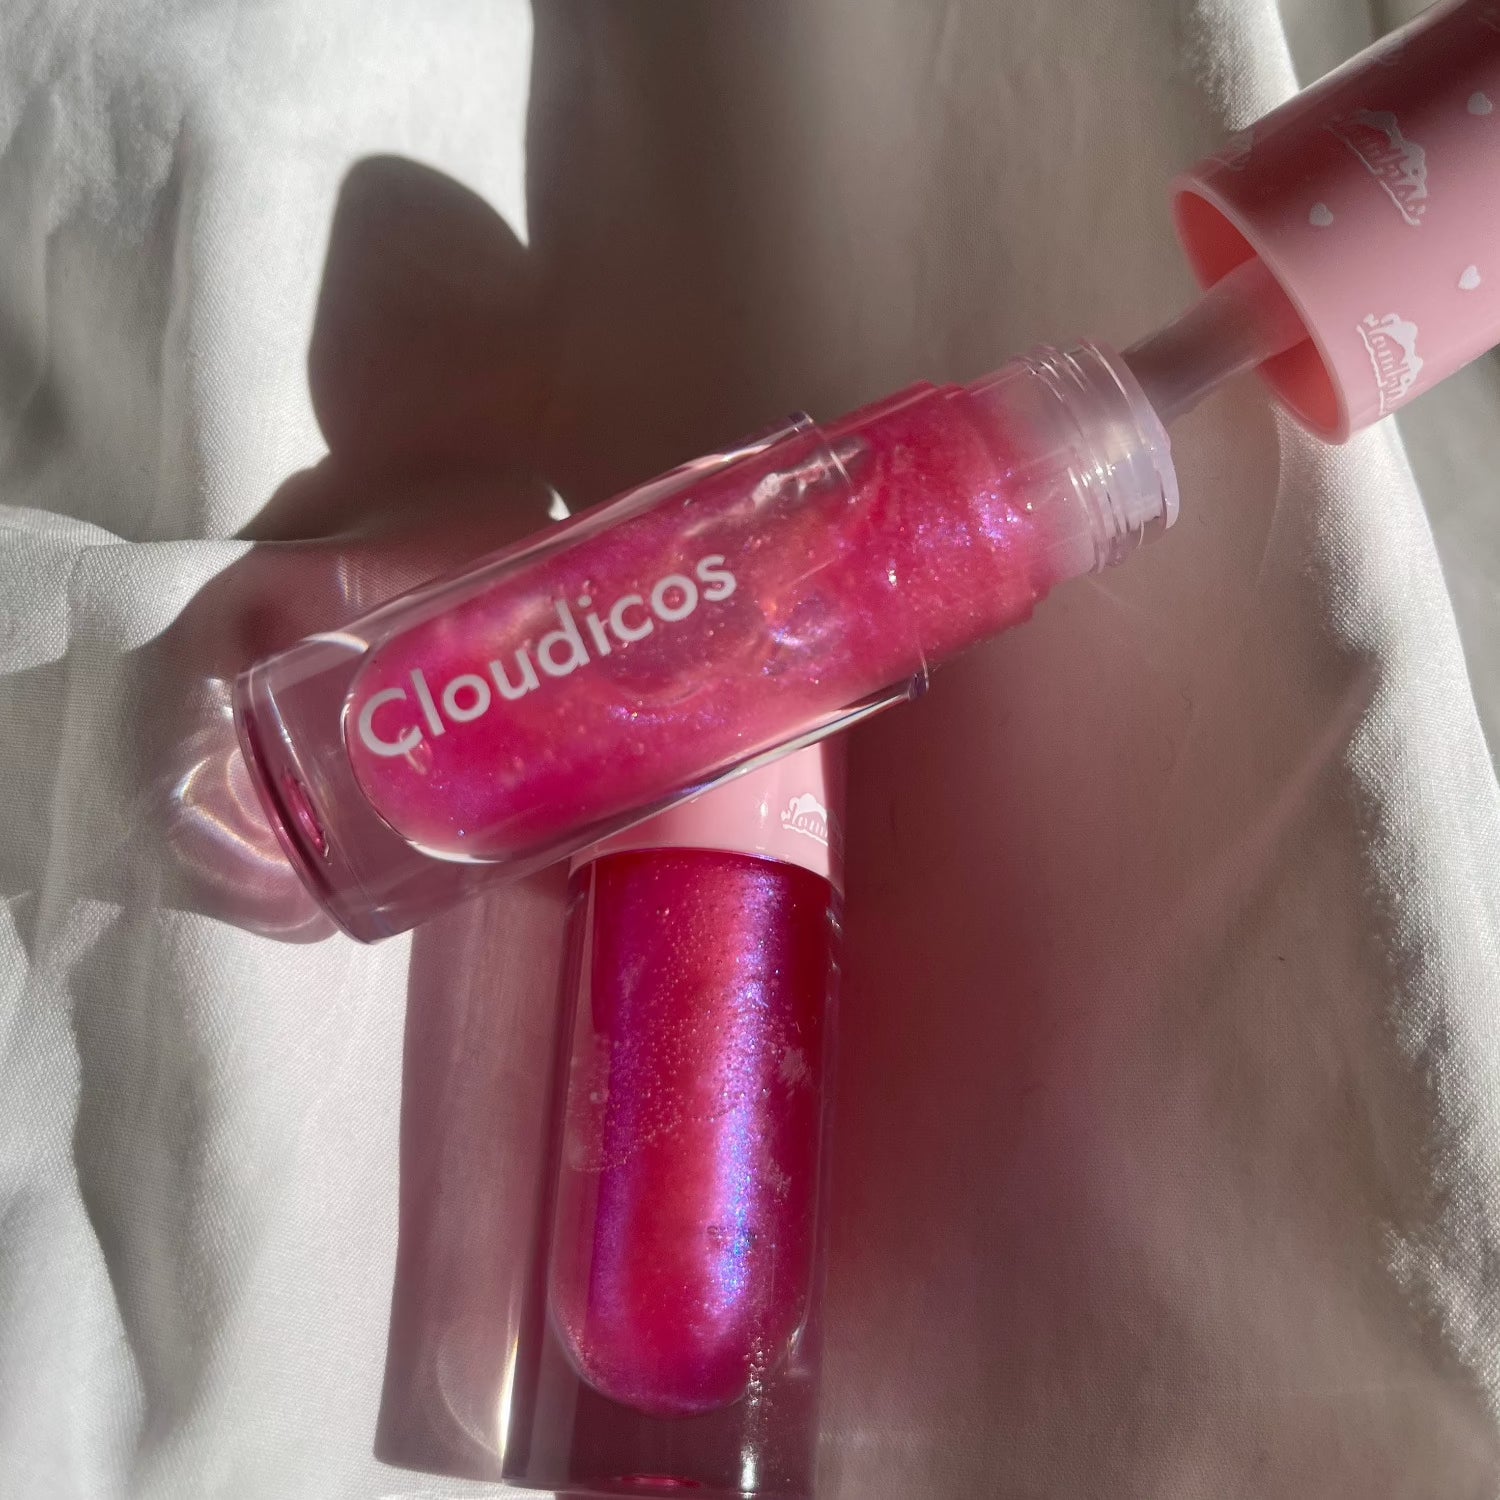 sparkly pink and purple iridescent lip gloss aussie made